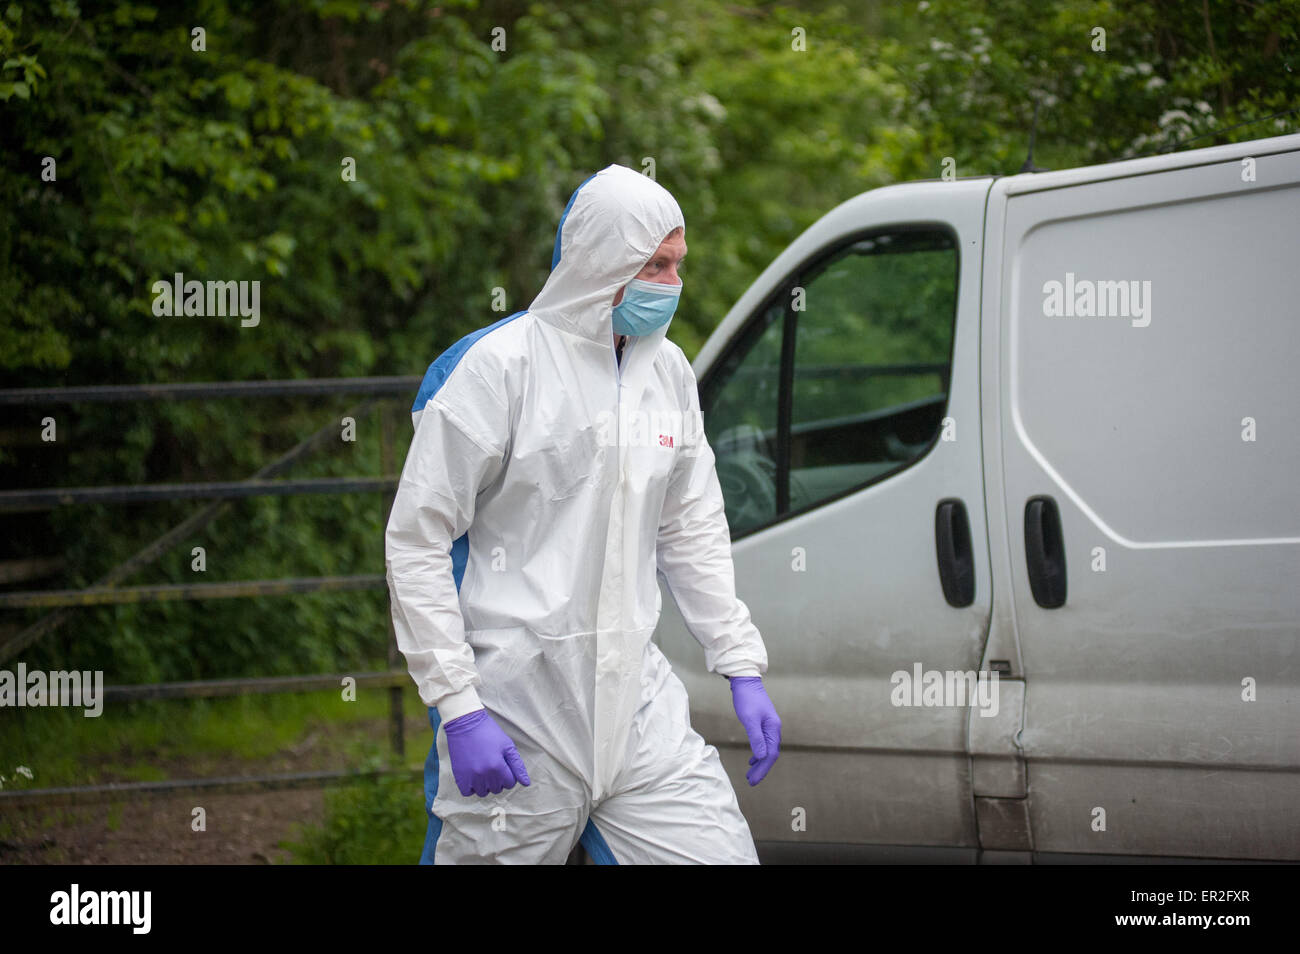 Forensics officers and police at a scene of crime Oxford UK 2015 Stock Photo